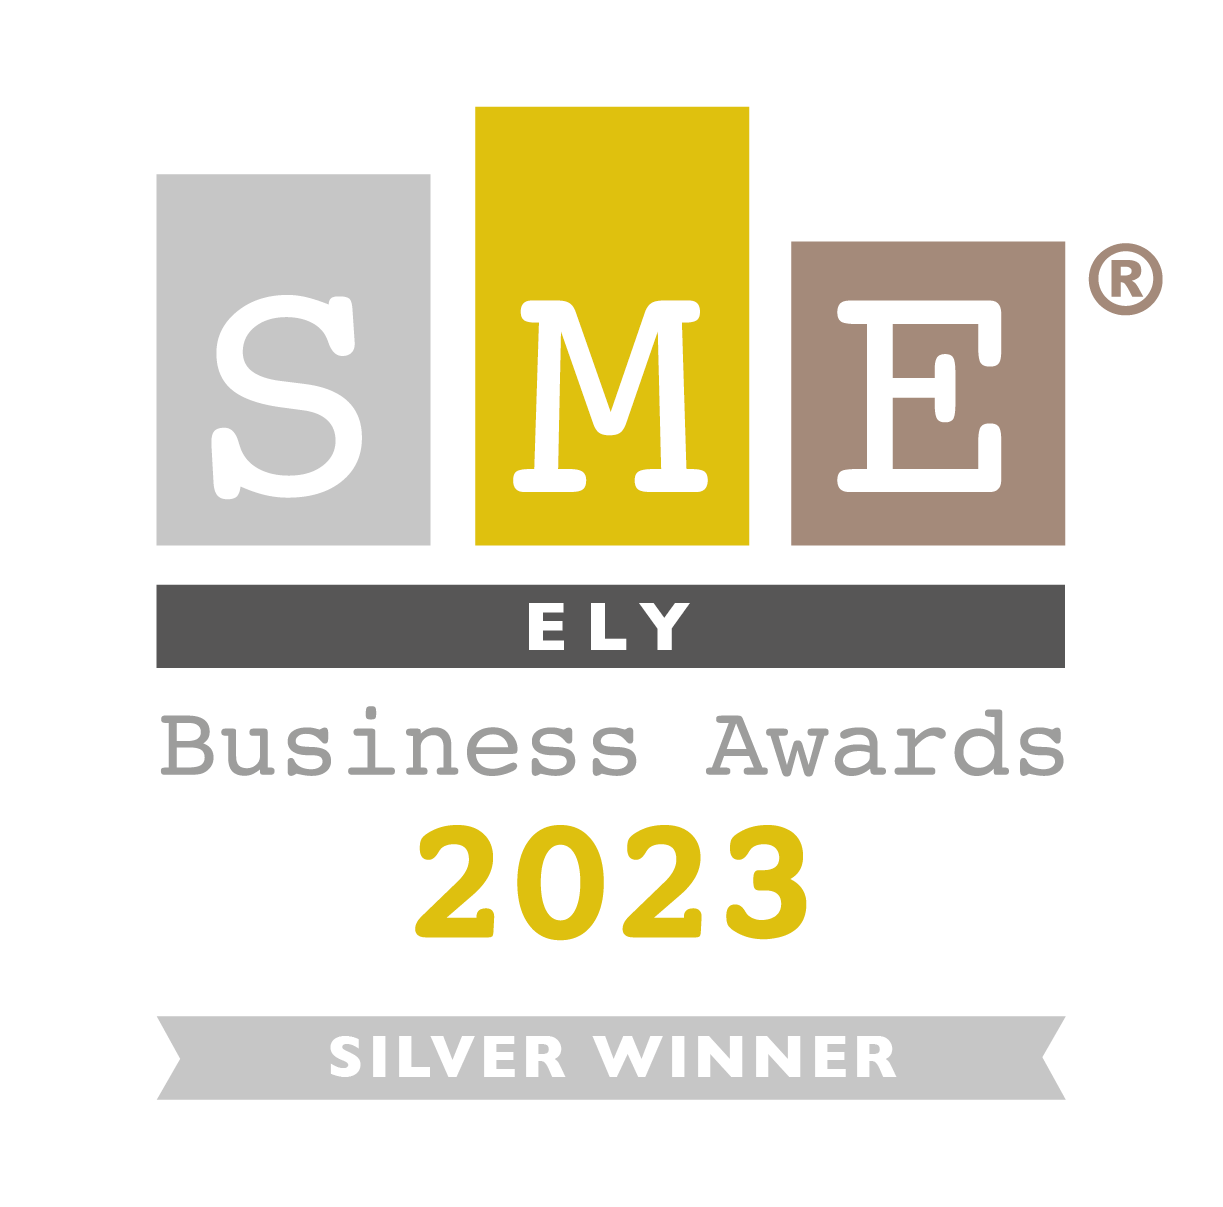 Ely Business Awards 2023 - Silver Winner for Service Excellence